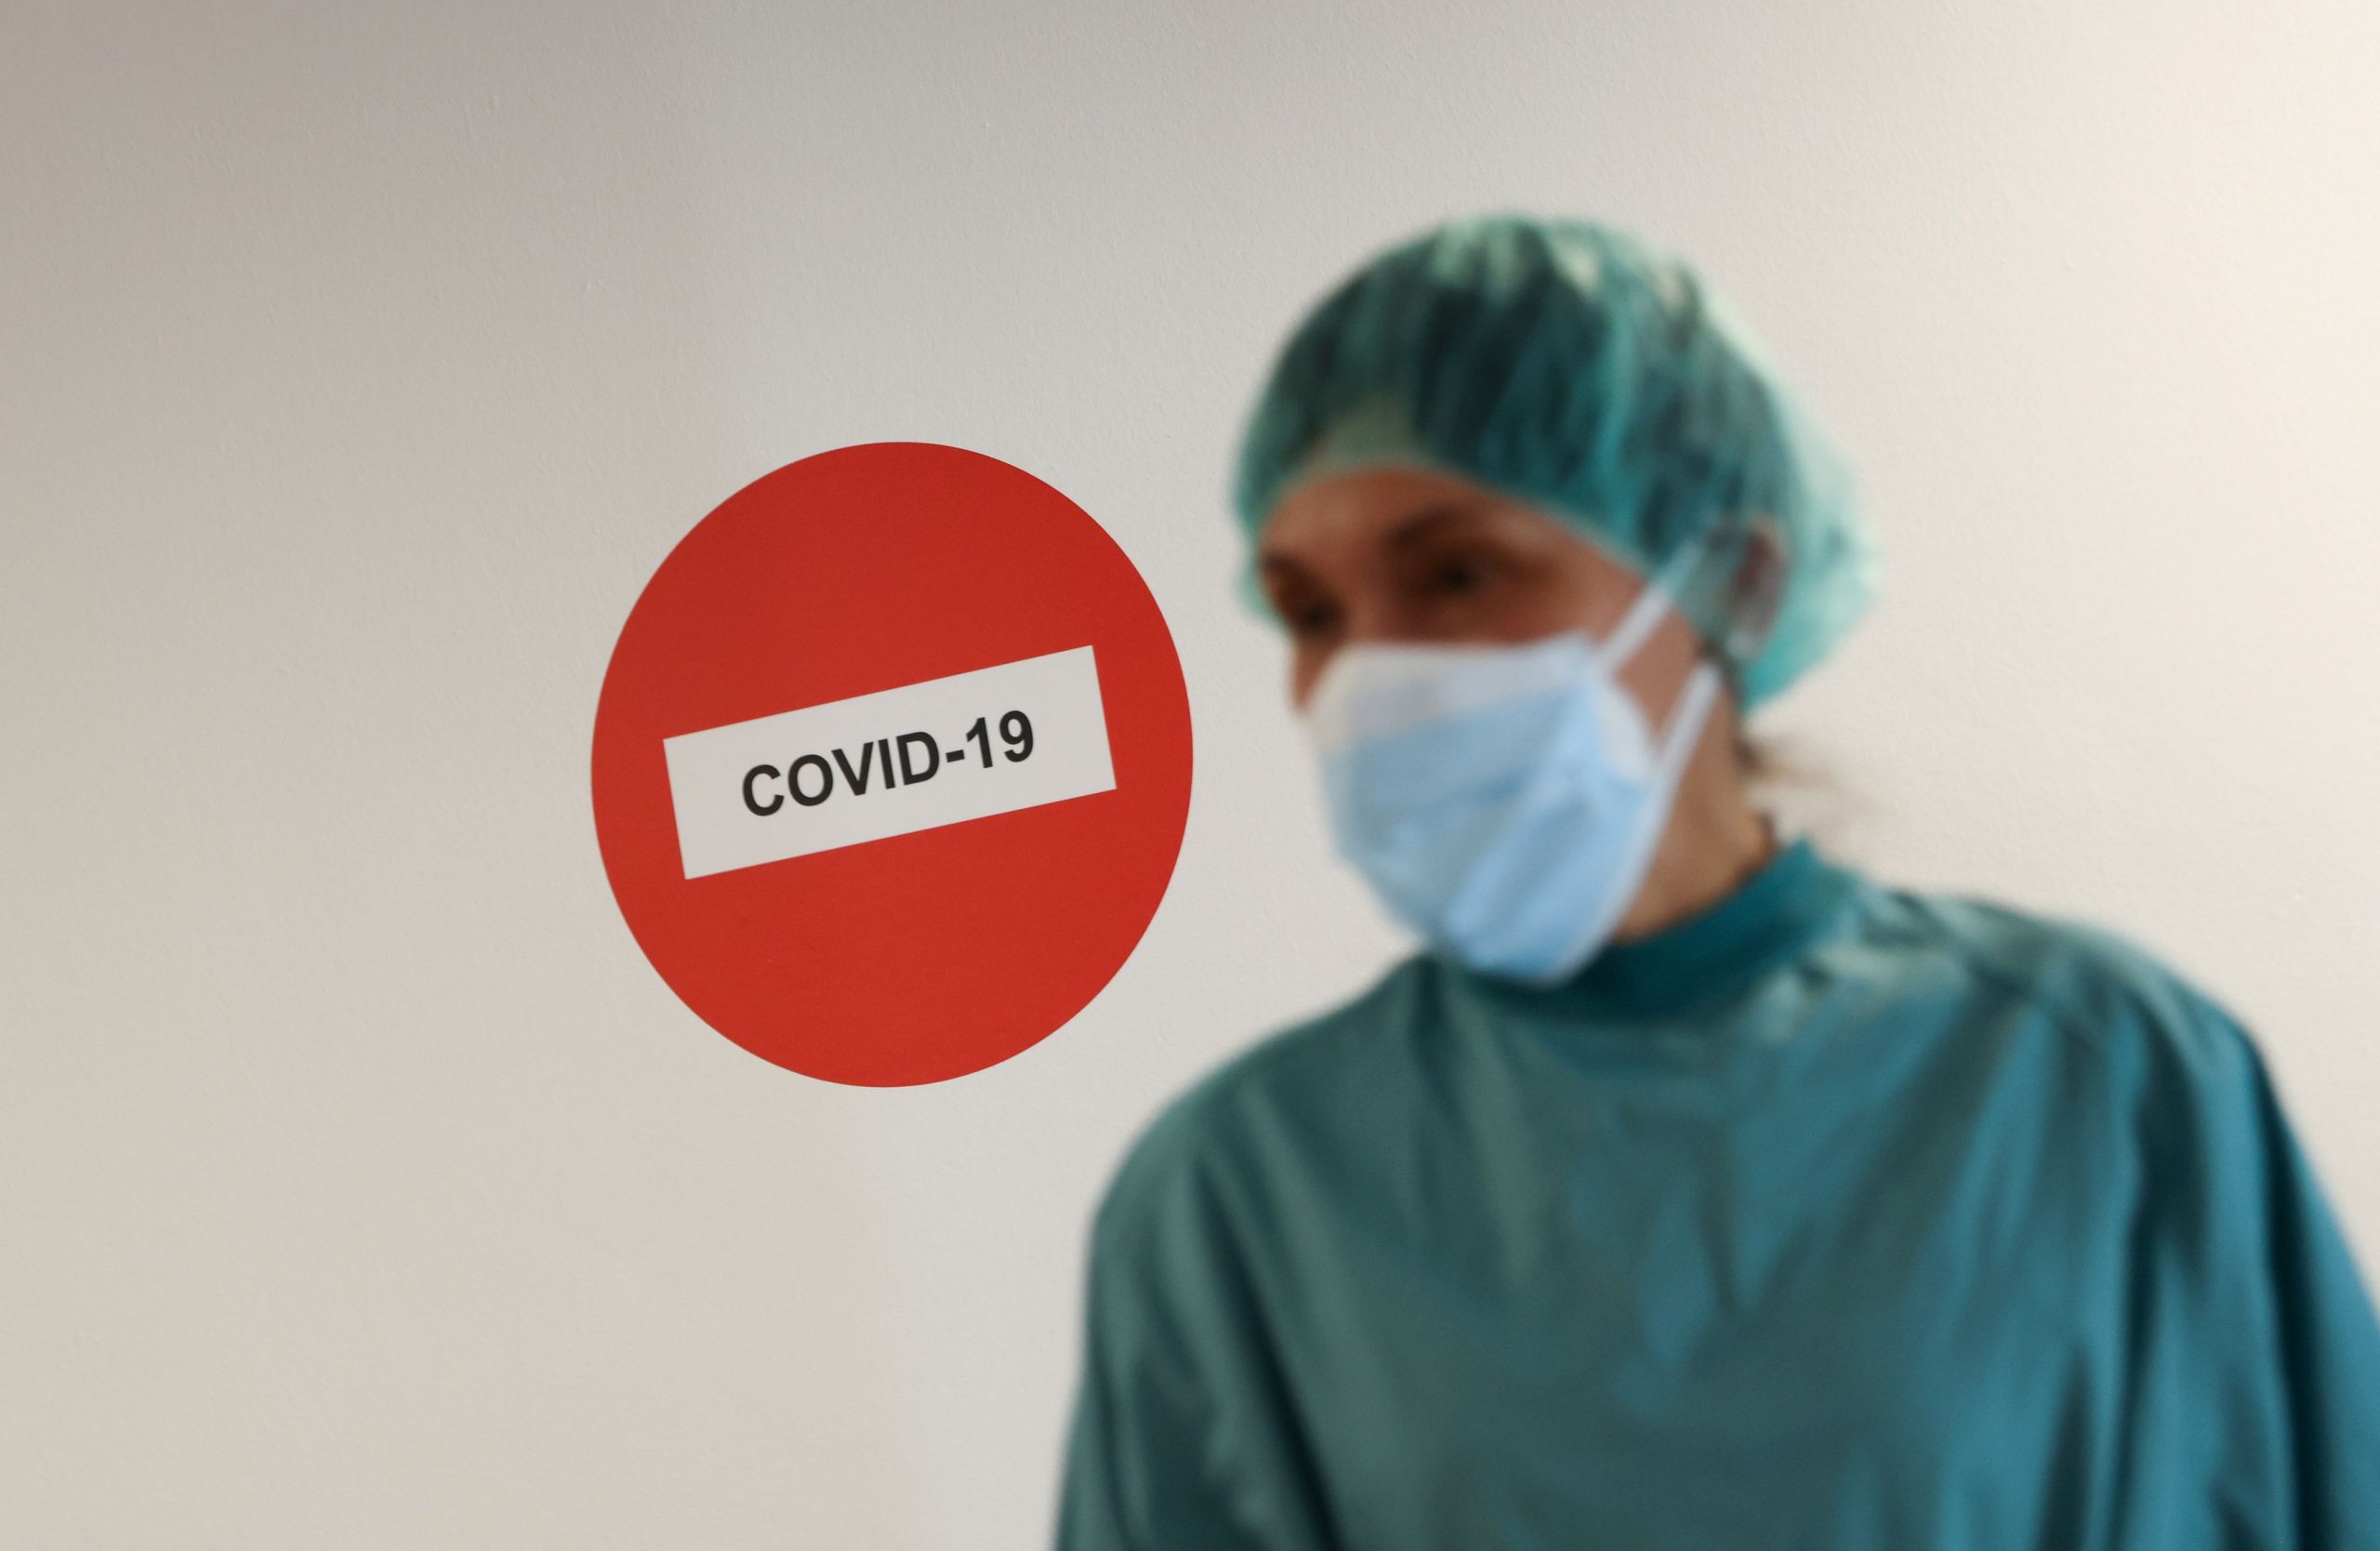 Crete, other regions in Greece in ECDC’s ‘red zone’ for Covid-19 infections